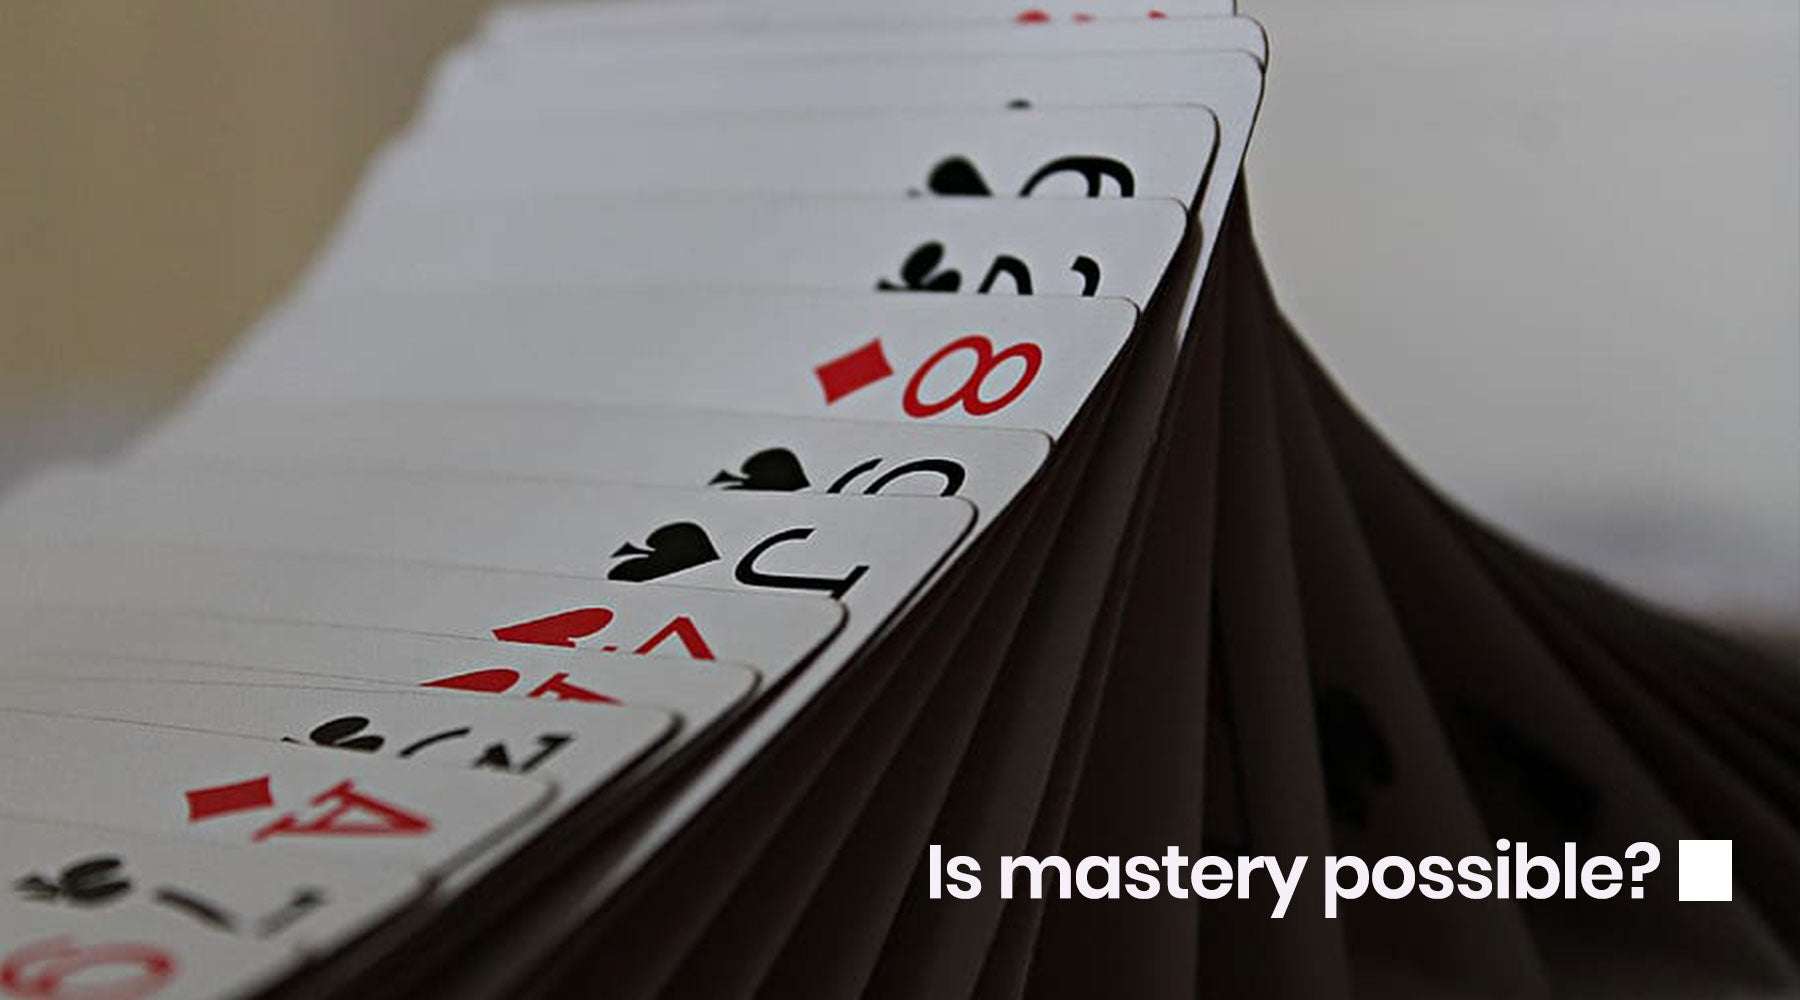 The realization that mastery is impossible